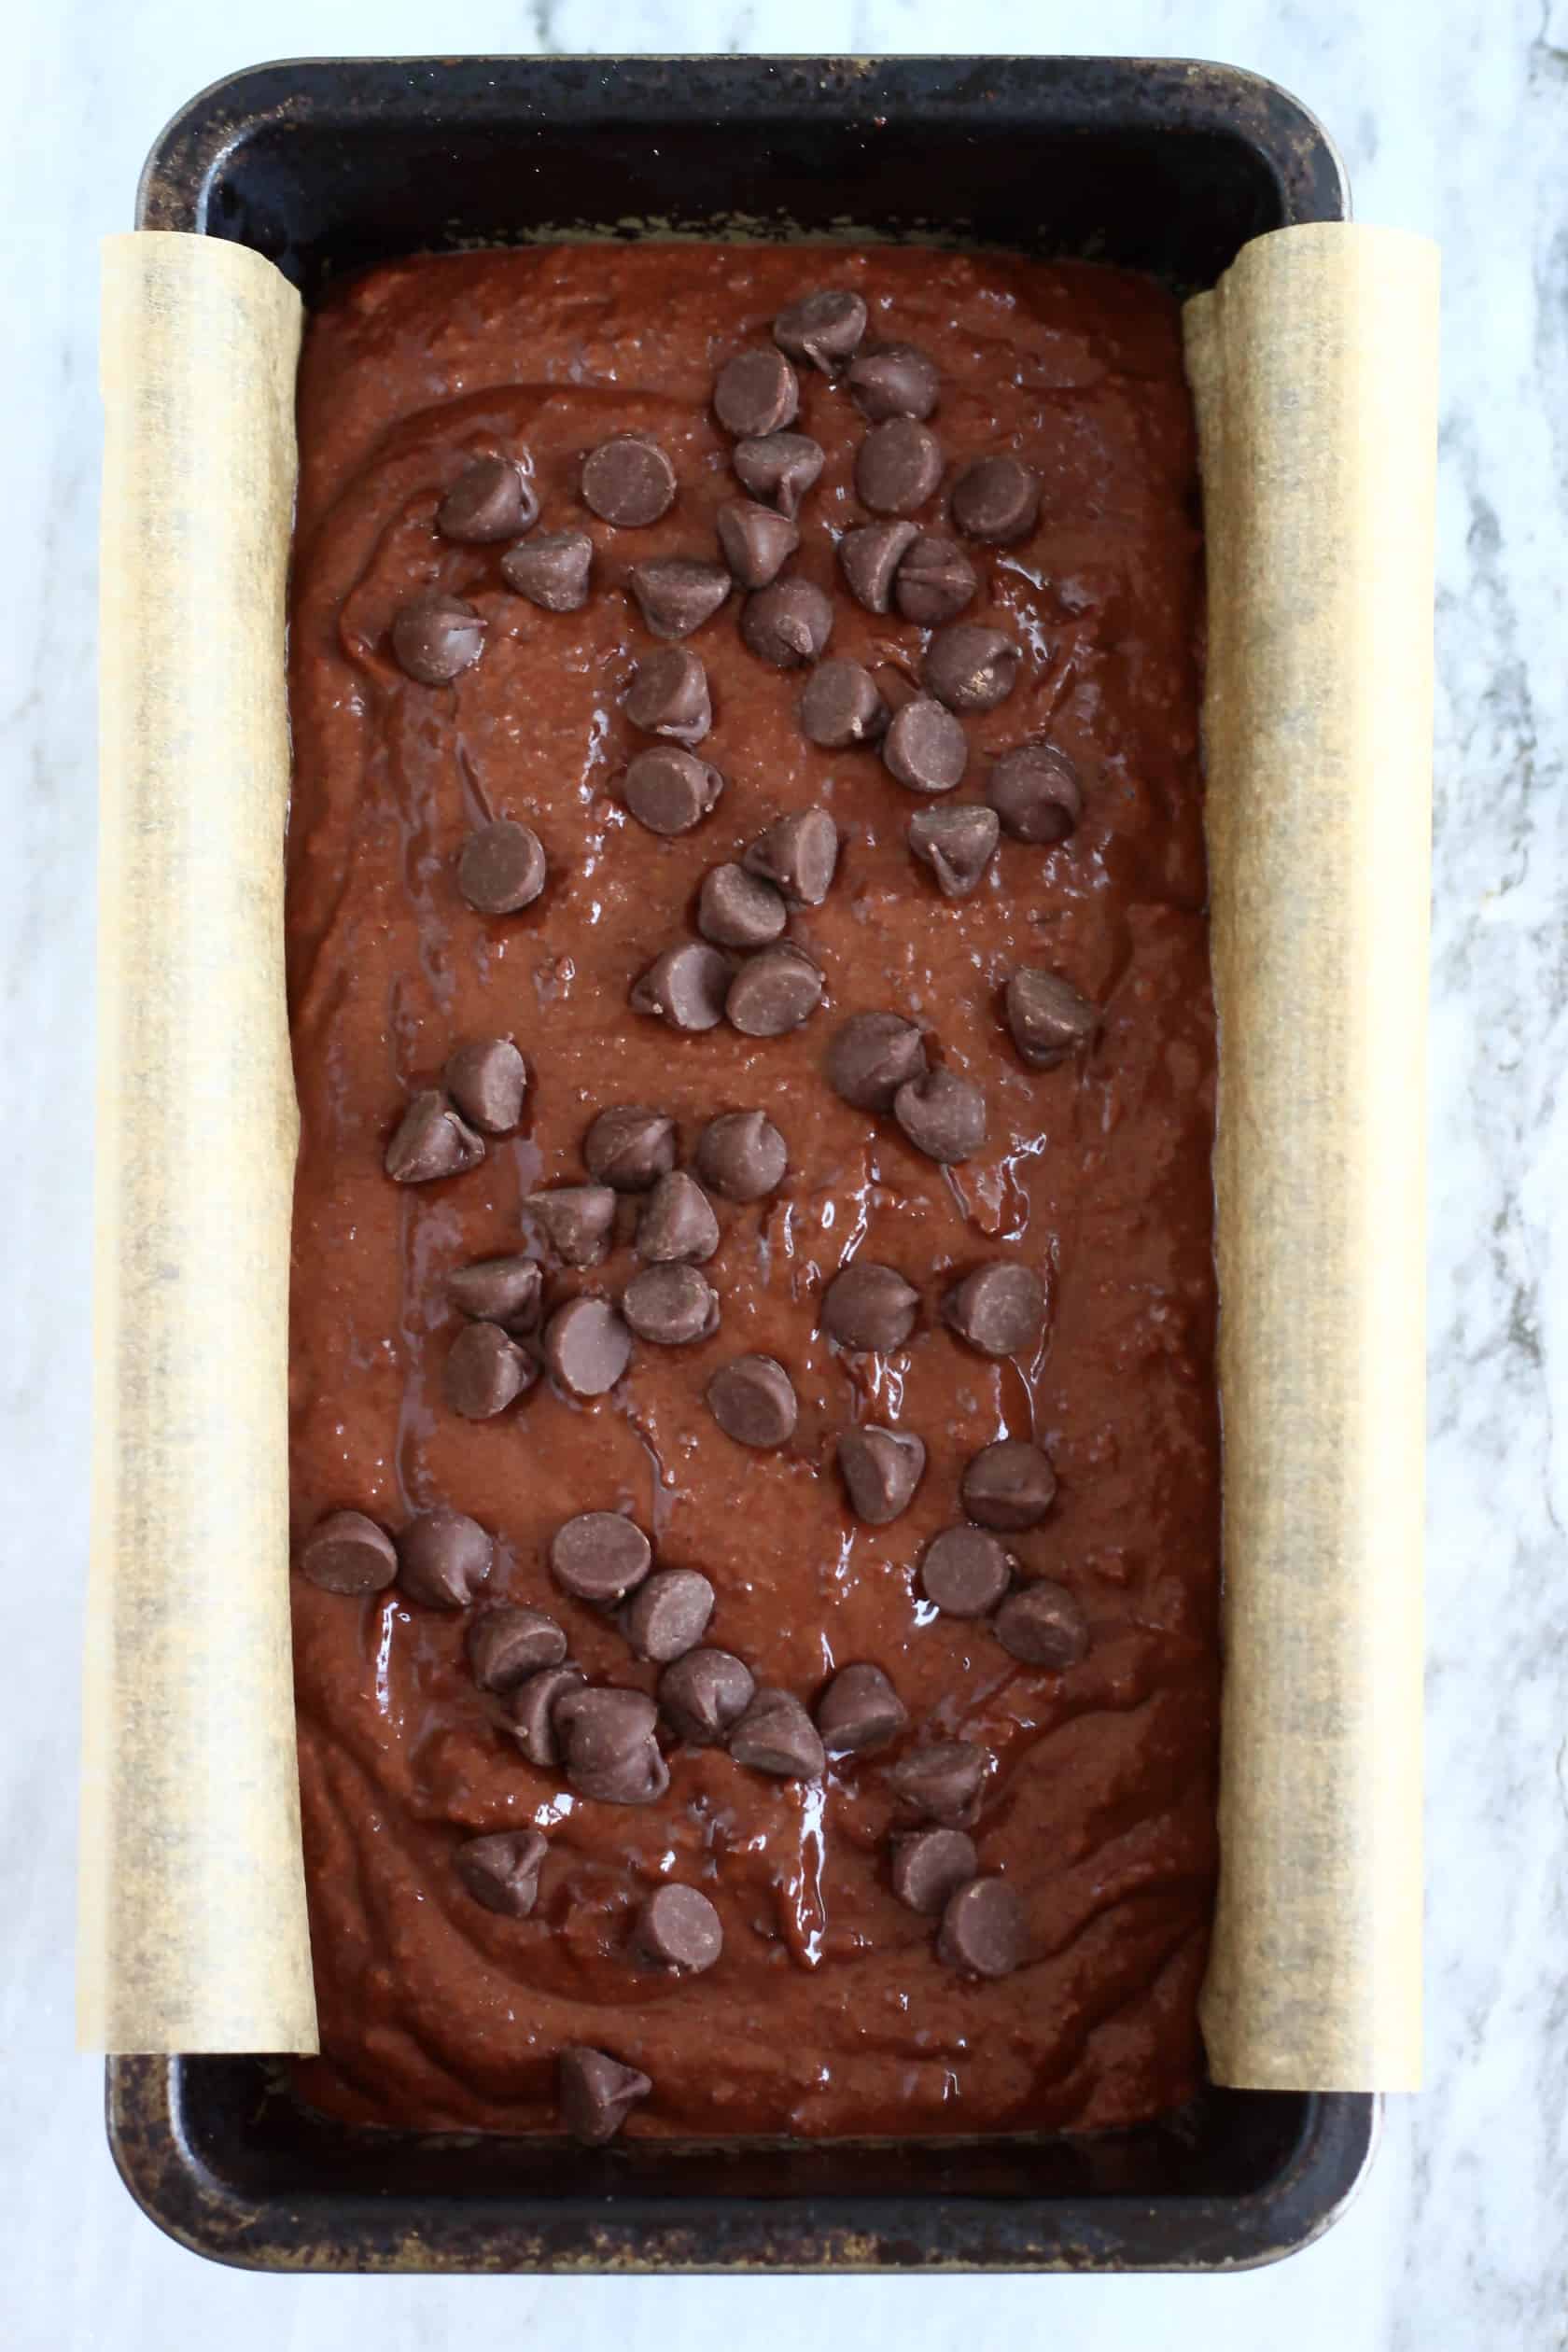 Gluten-free vegan chocolate bread batter with chocolate chips in a loaf tin lined with baking paper